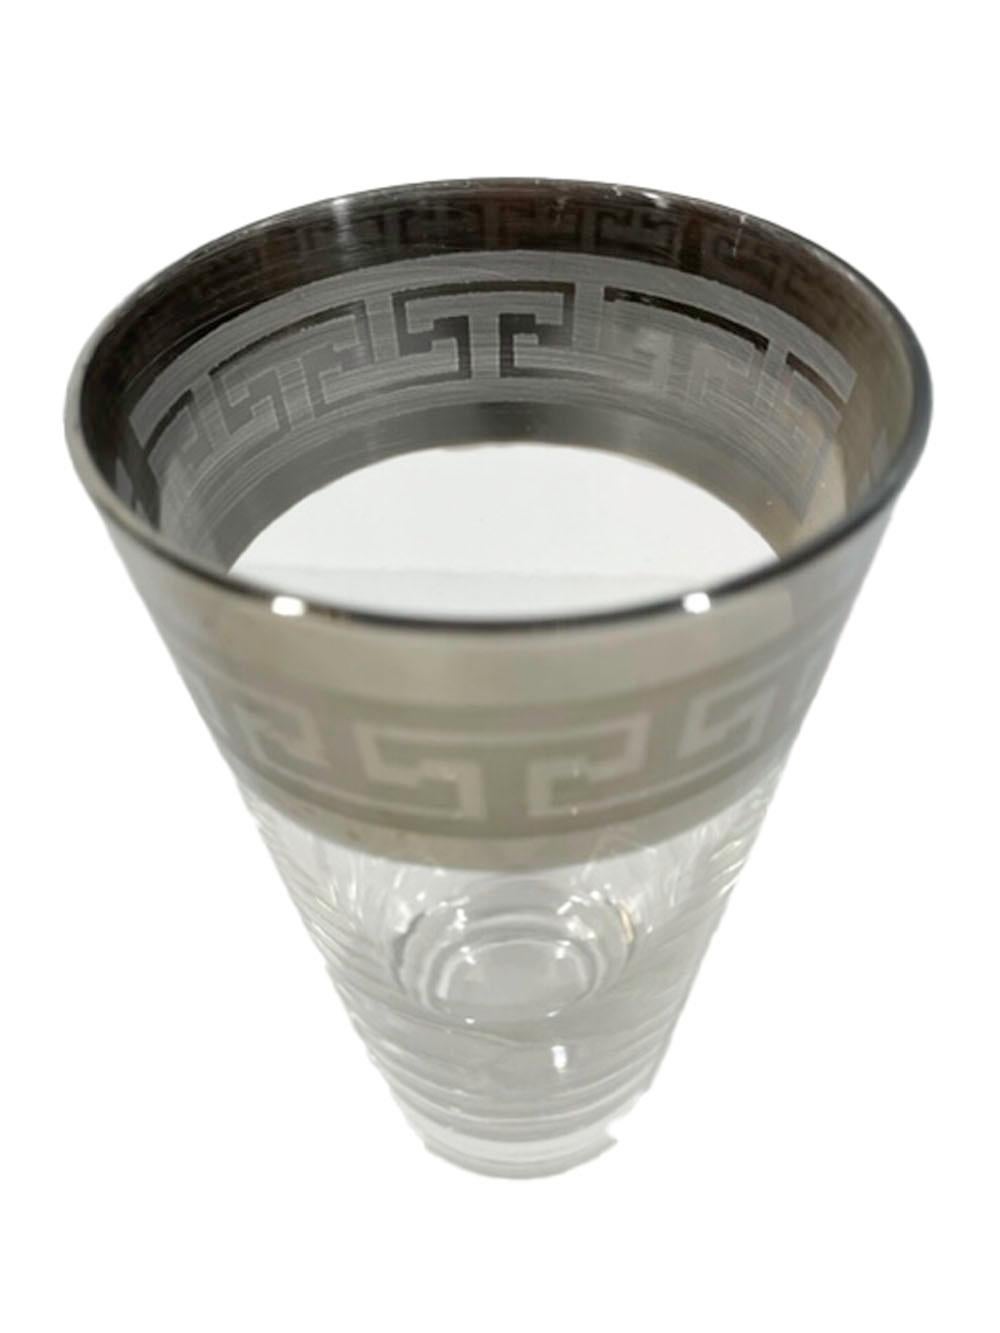 silver rimmed drinking glasses